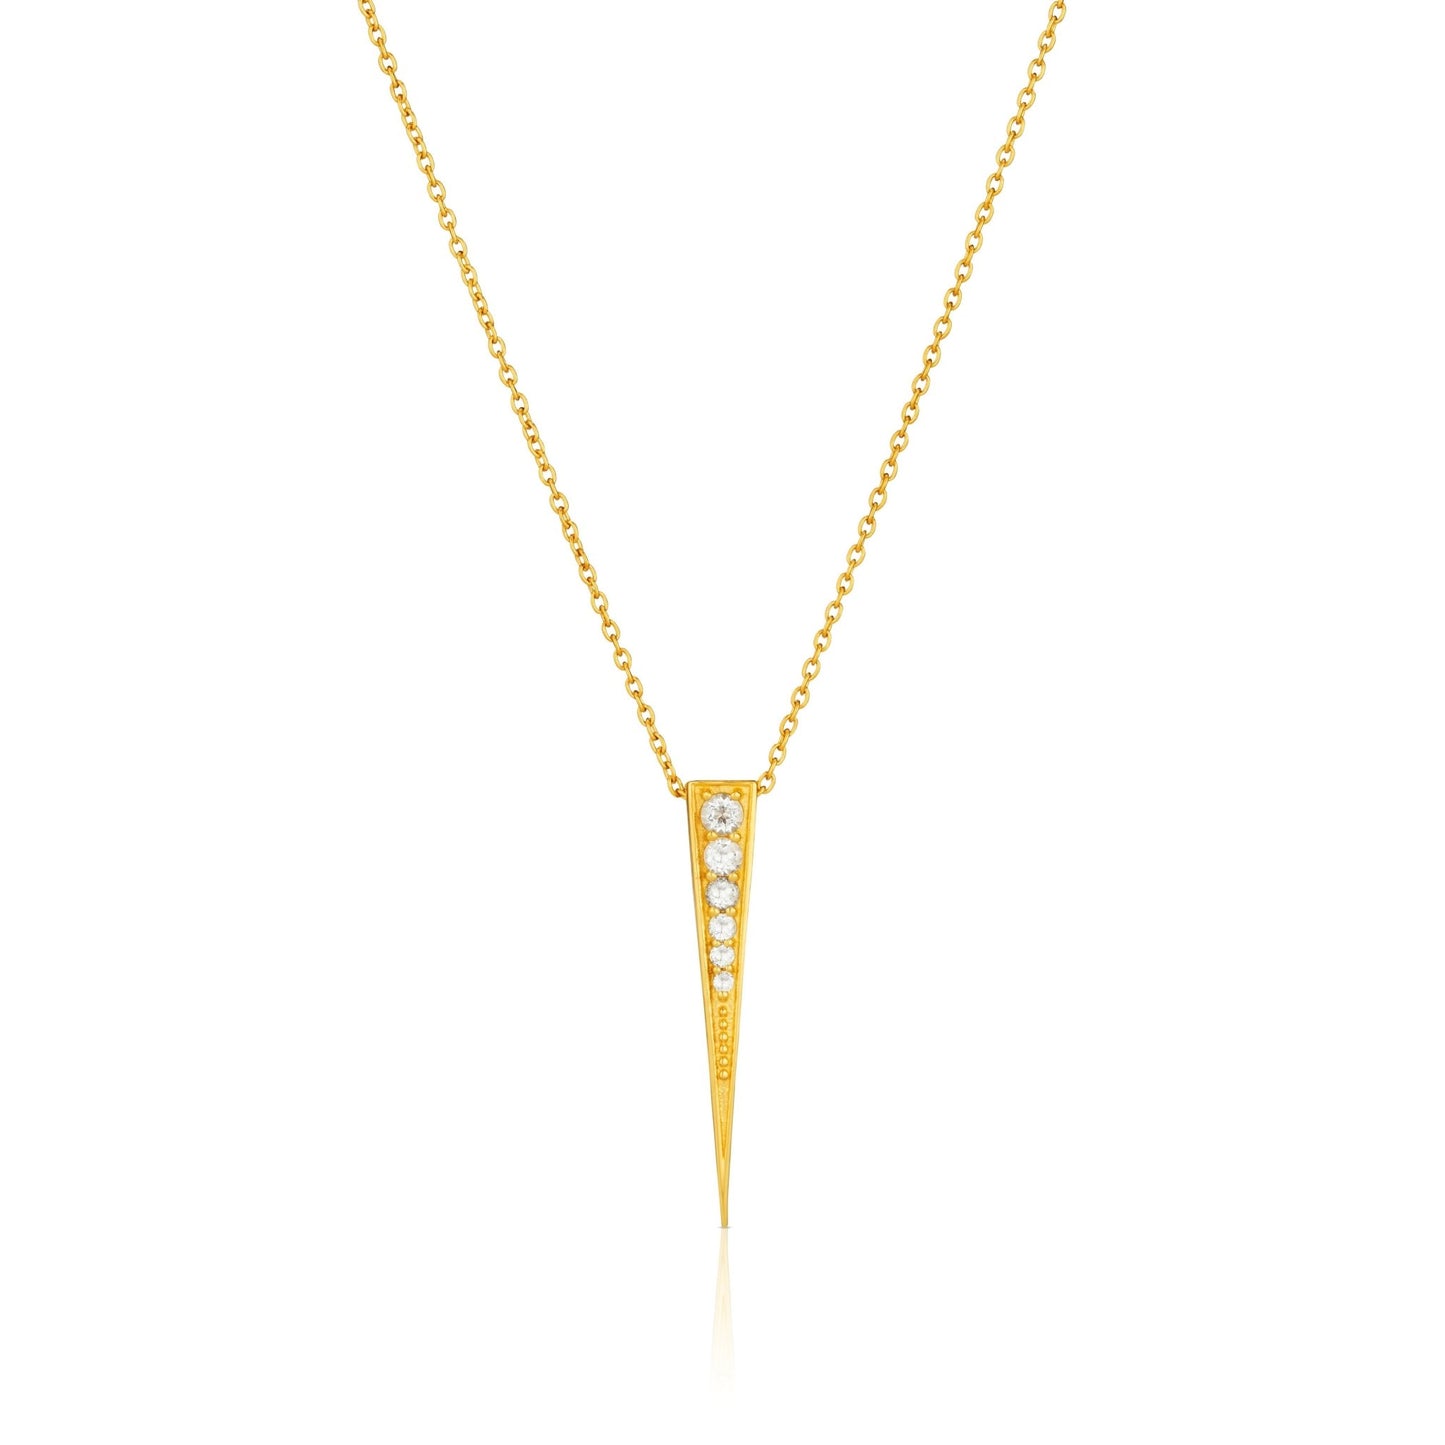 WHITE TOPAZ PAVE SPIKE PENDANT - Fool's Gold Jewellery